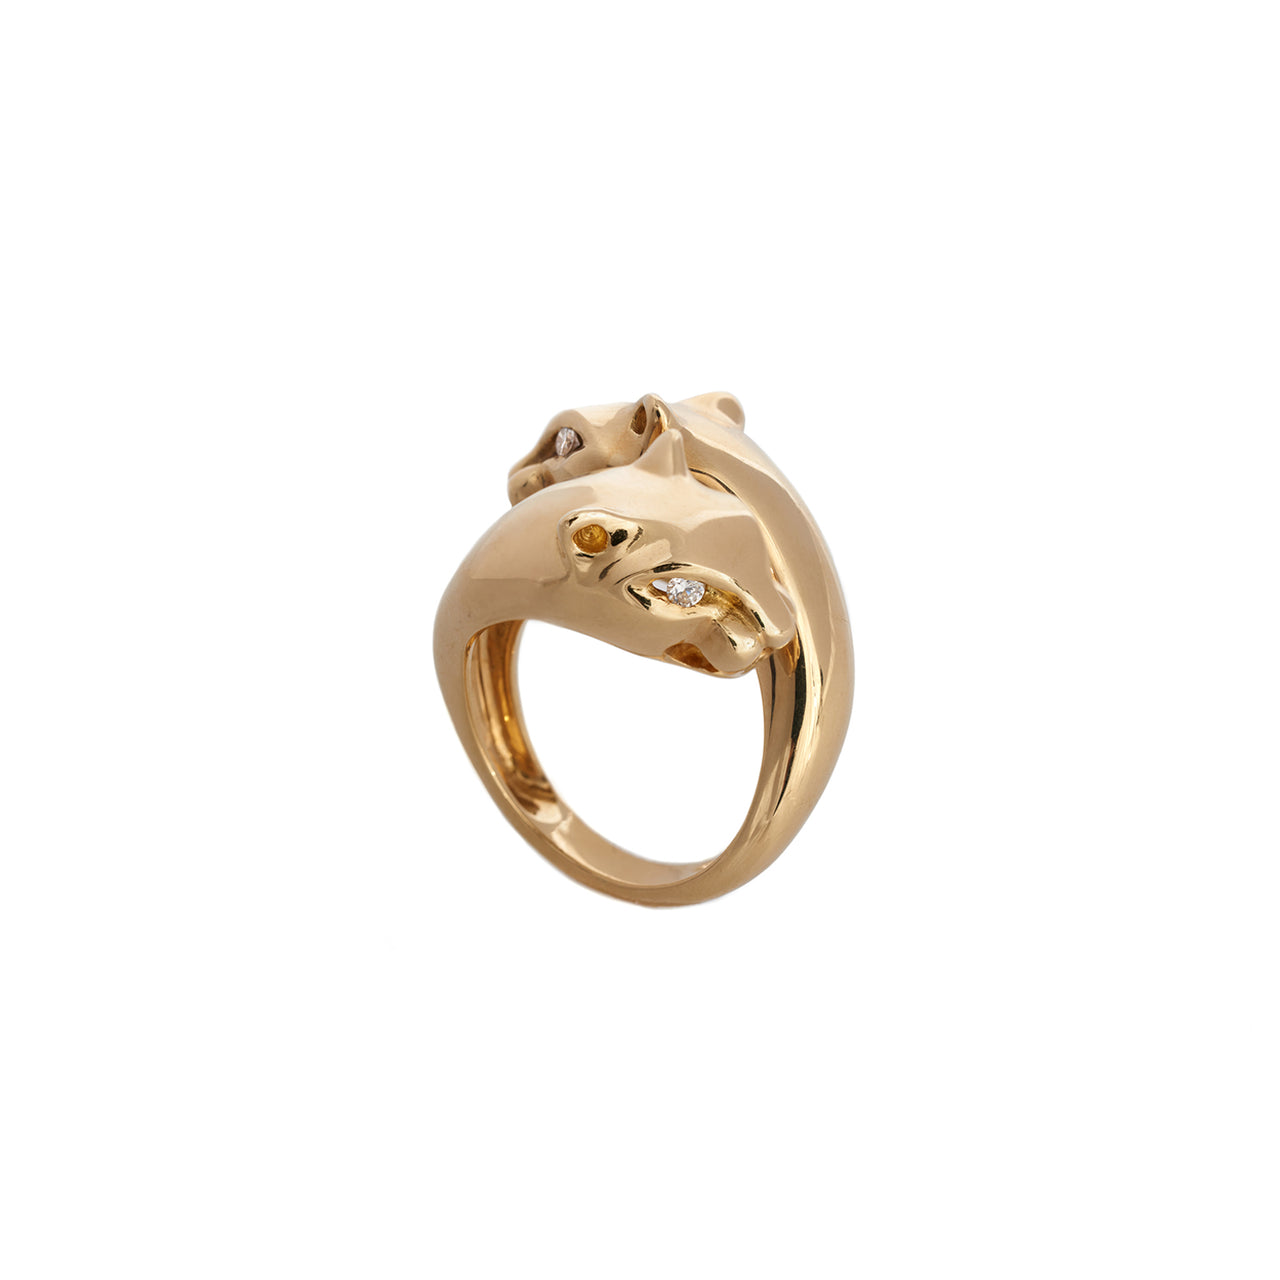 Petite Passionate Panther Ring with Diamonds